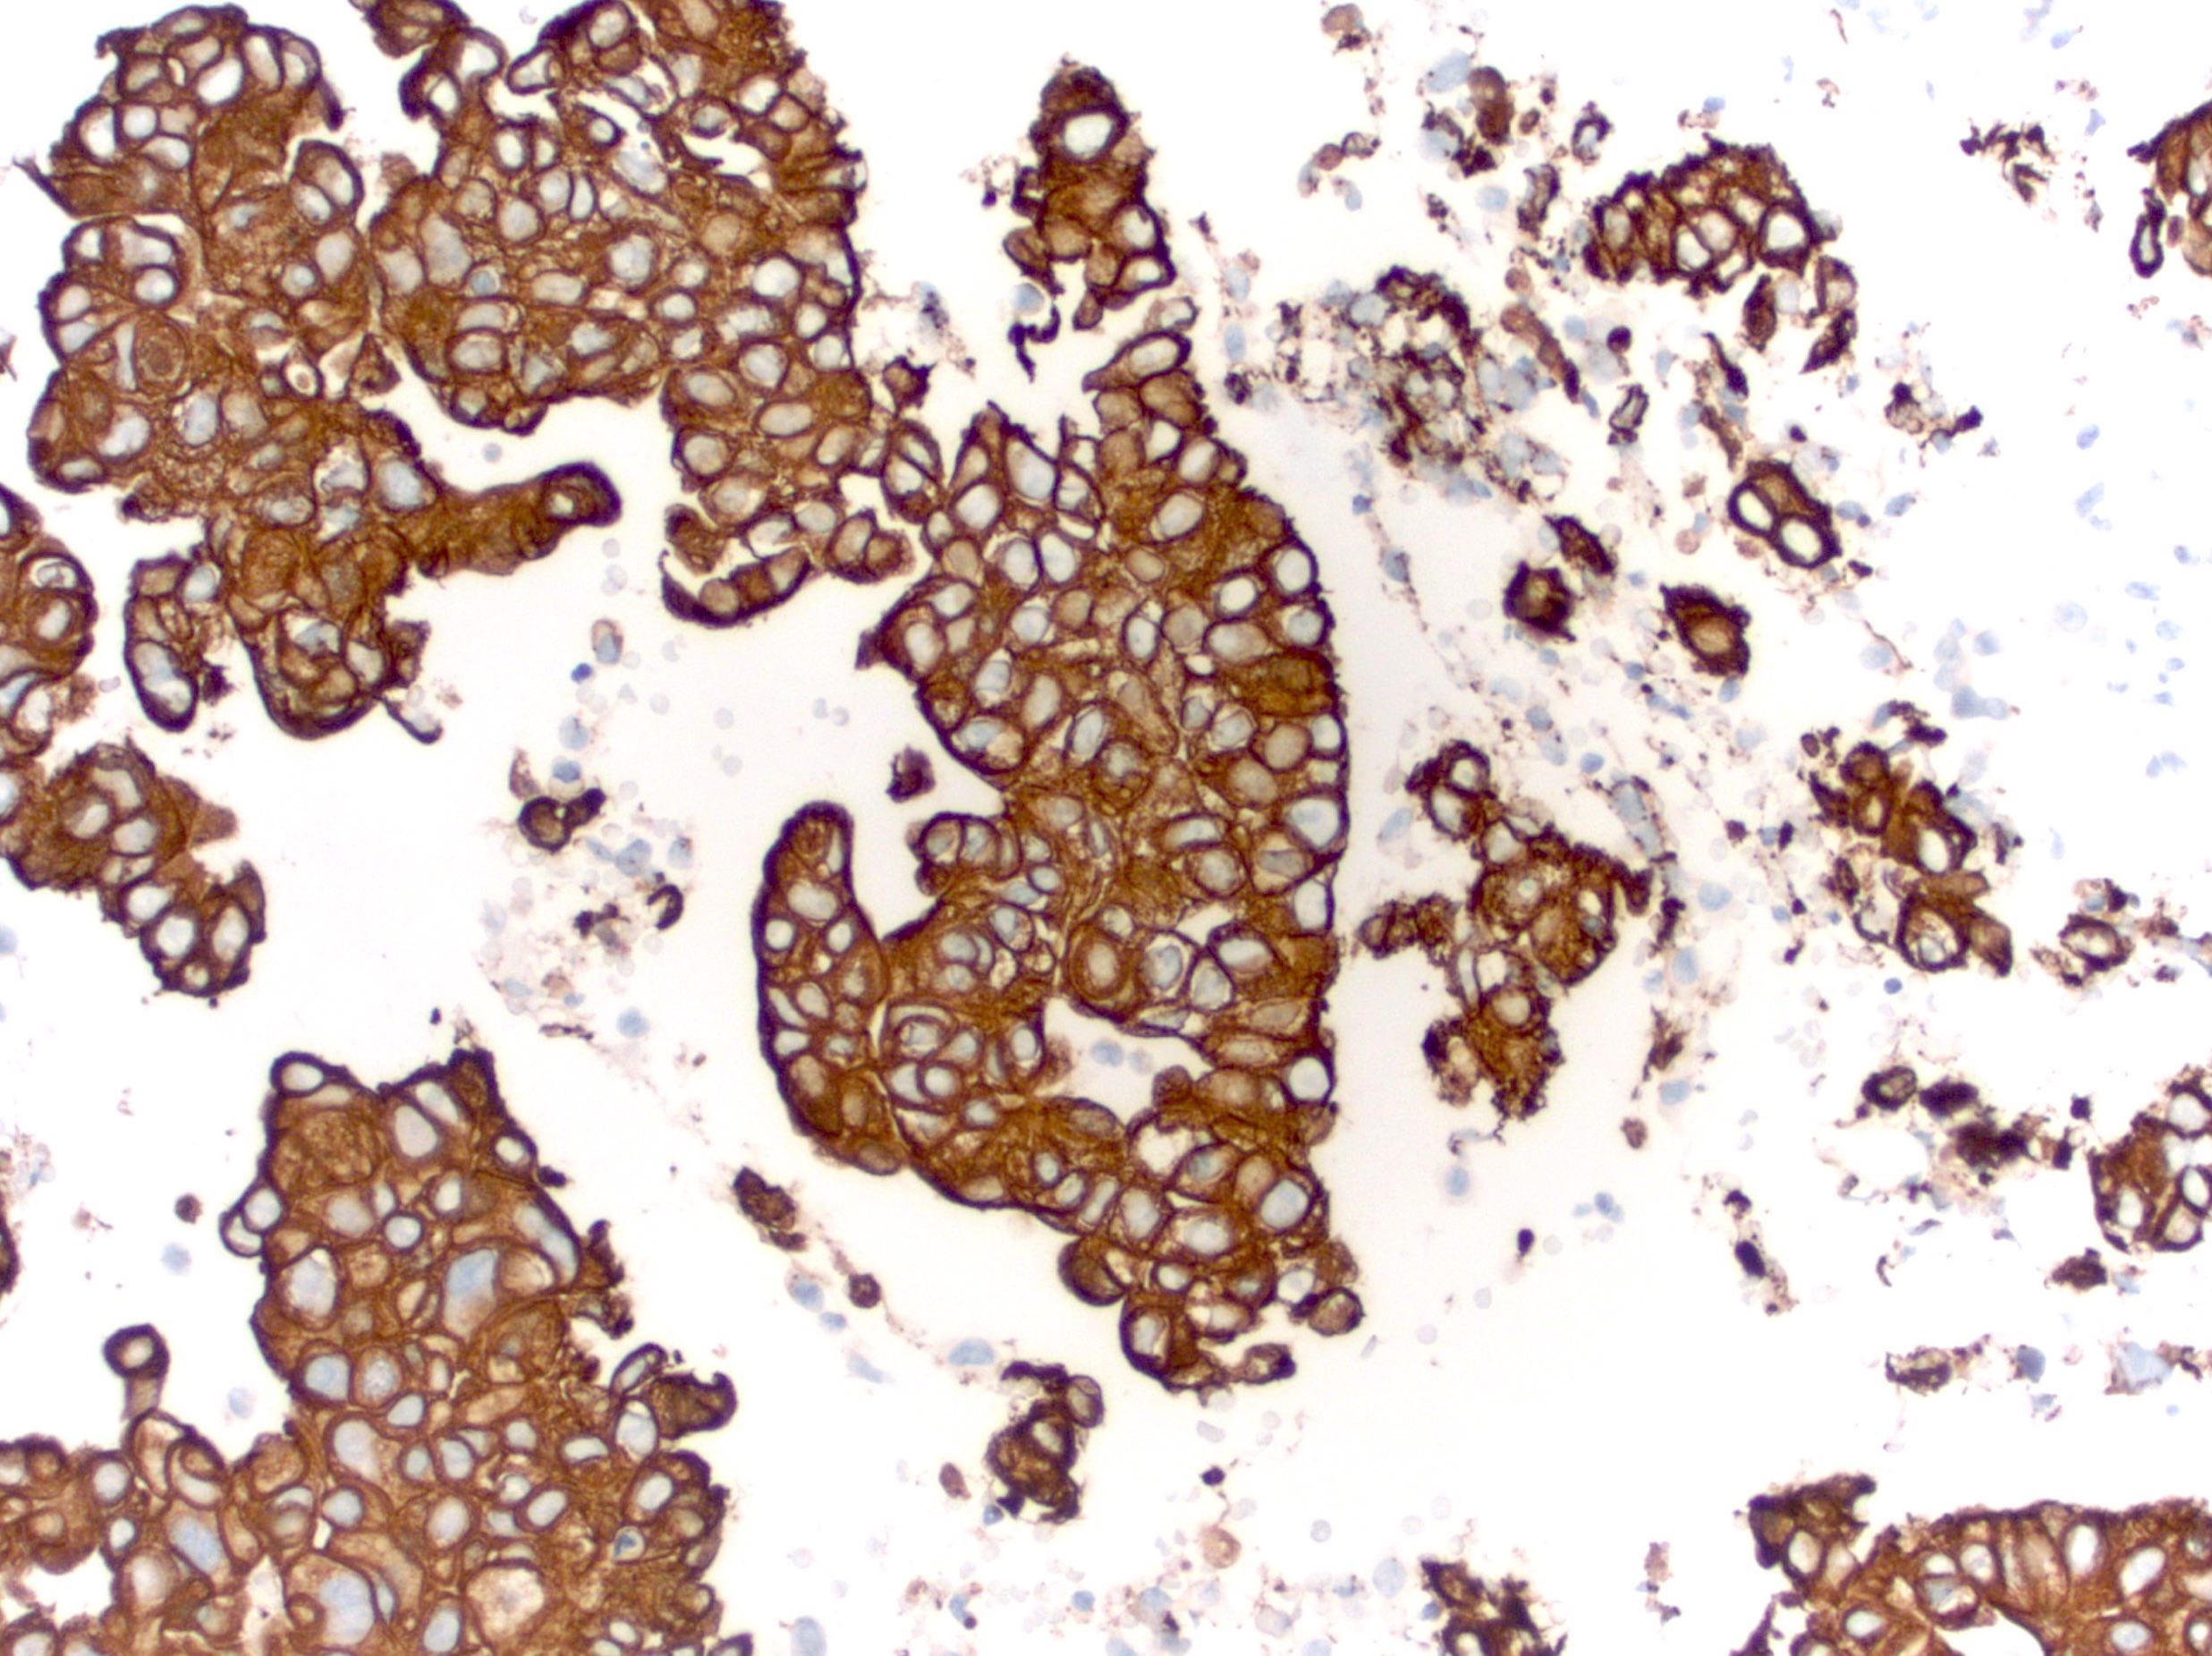 Poorly differentiated breast carcinoma